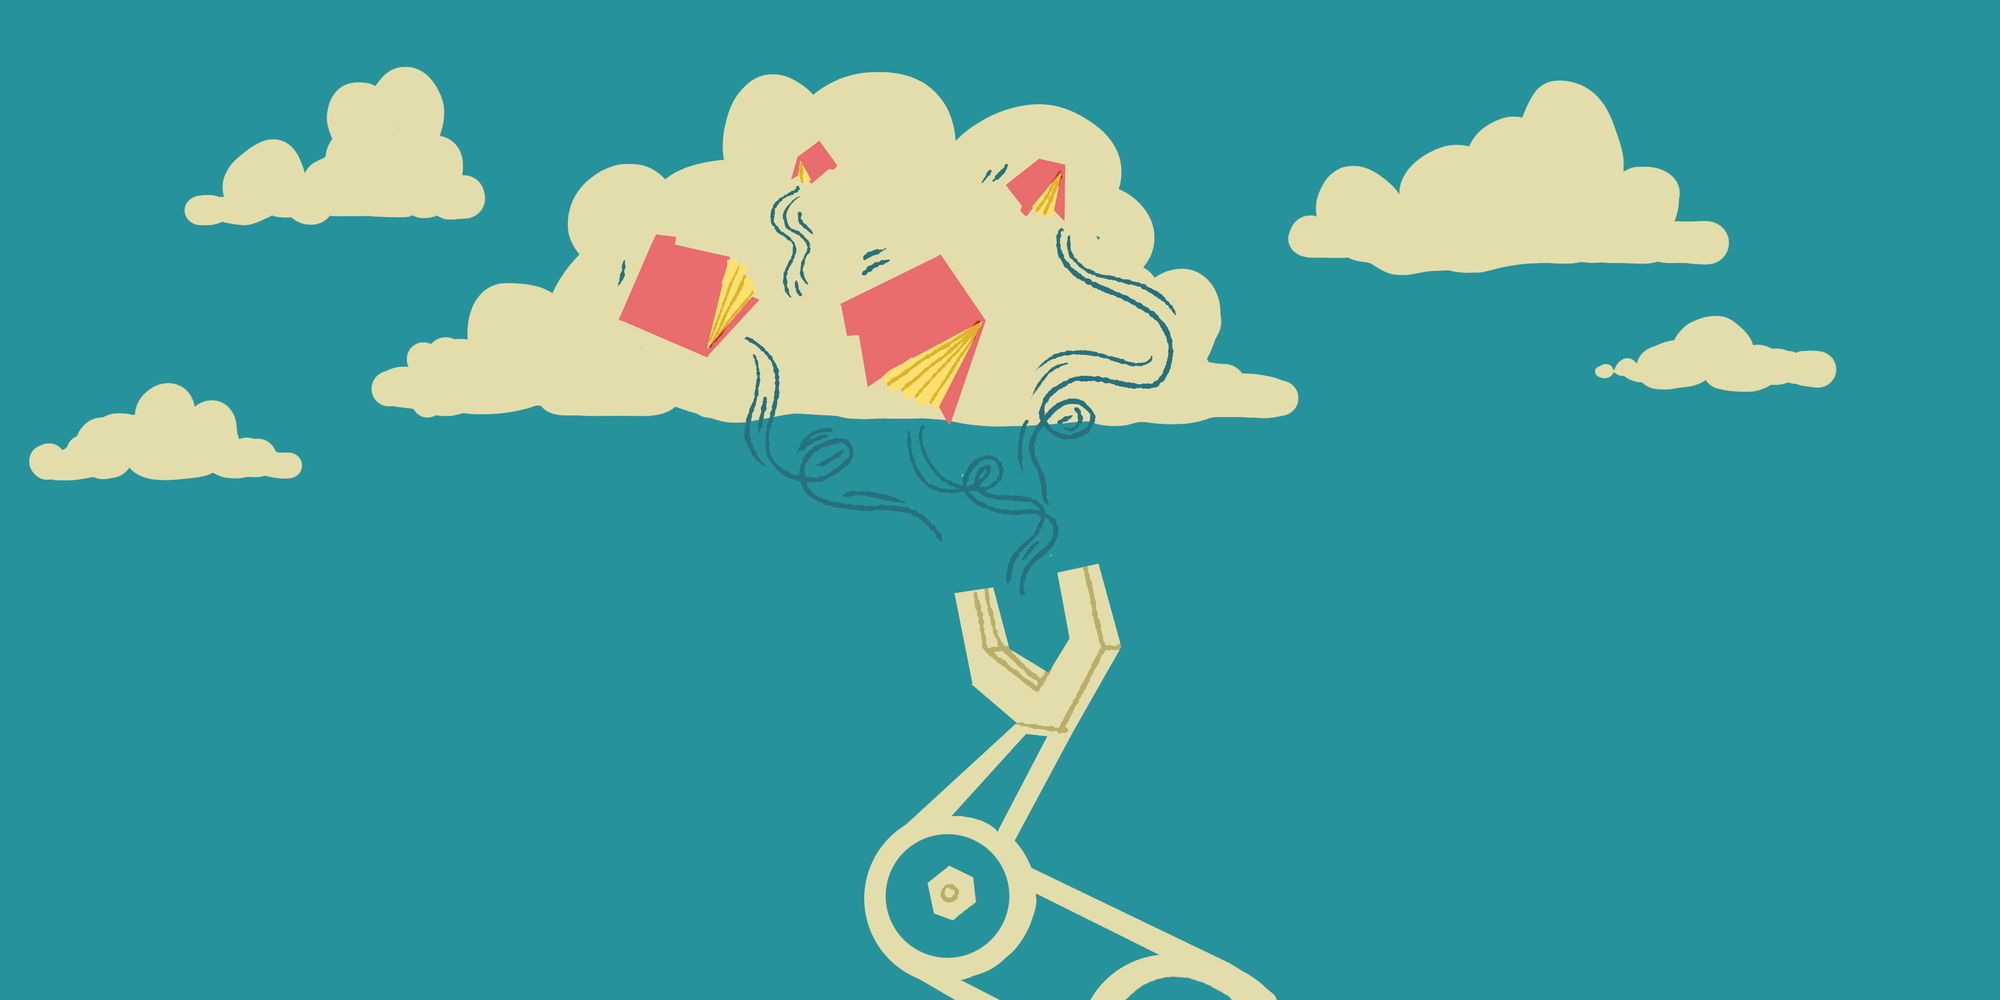 Illustration of a mechanical arm delivering books to the cloud.